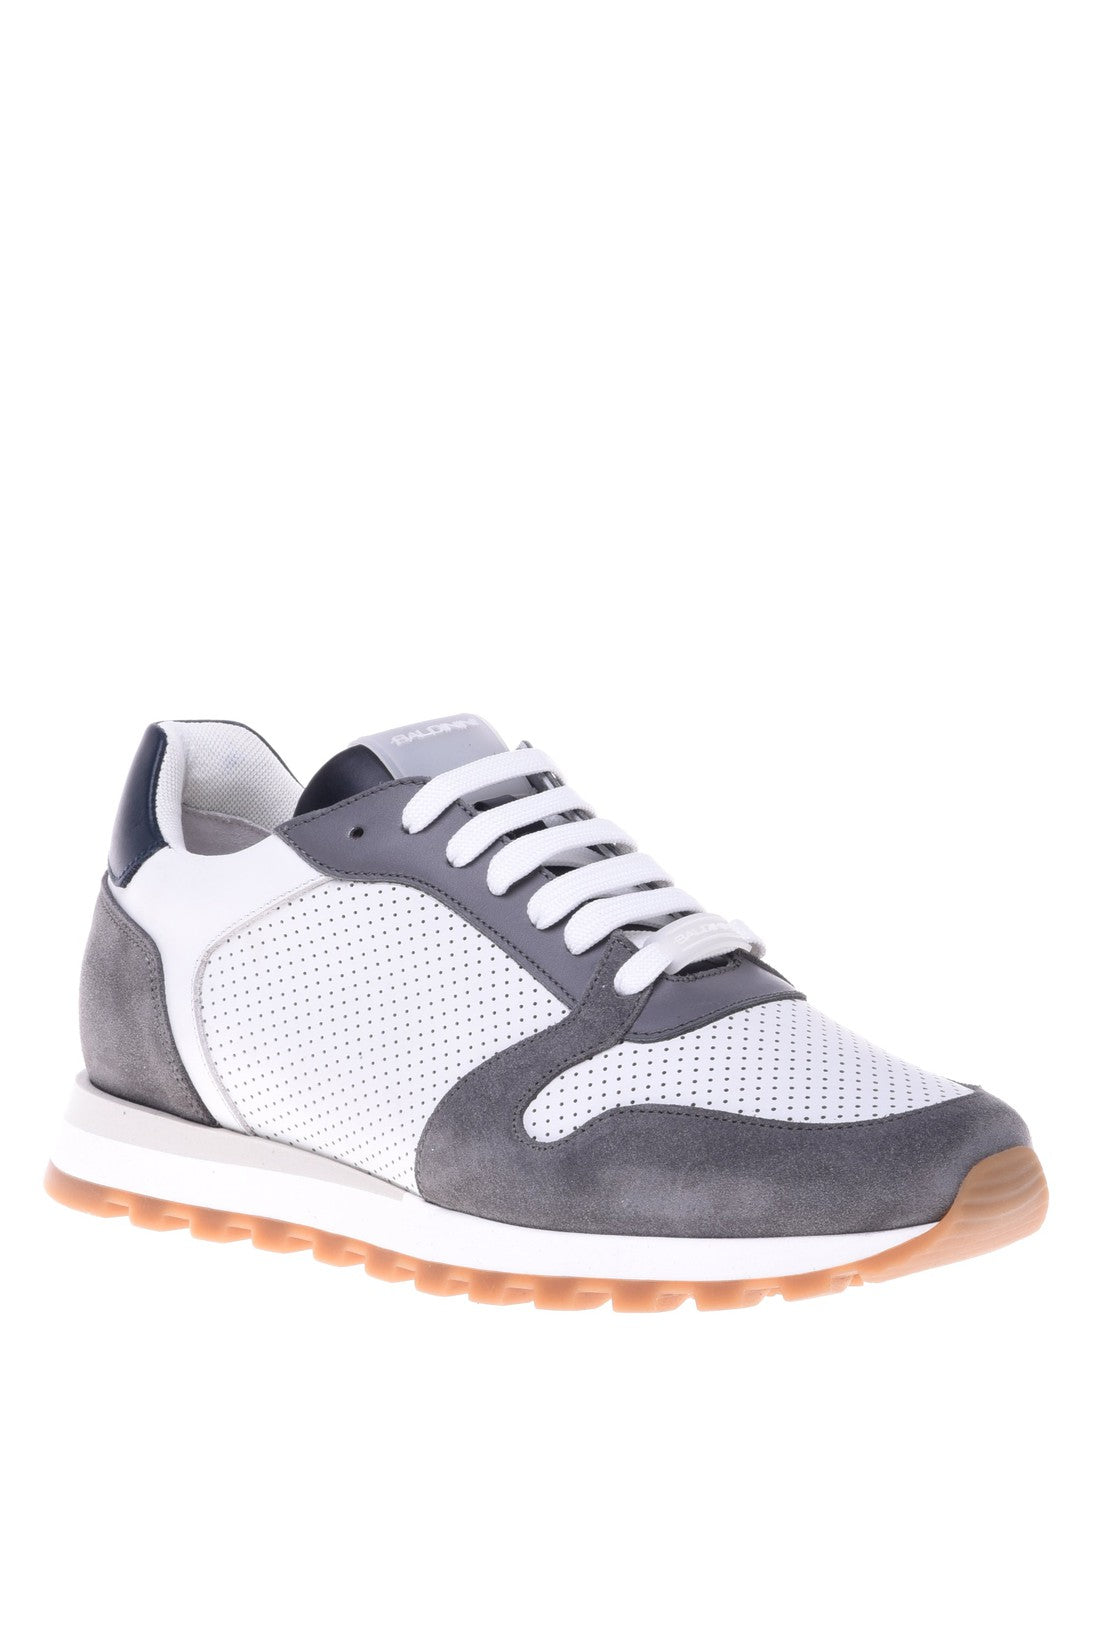 Sneaker in grey and white suede and calfskin